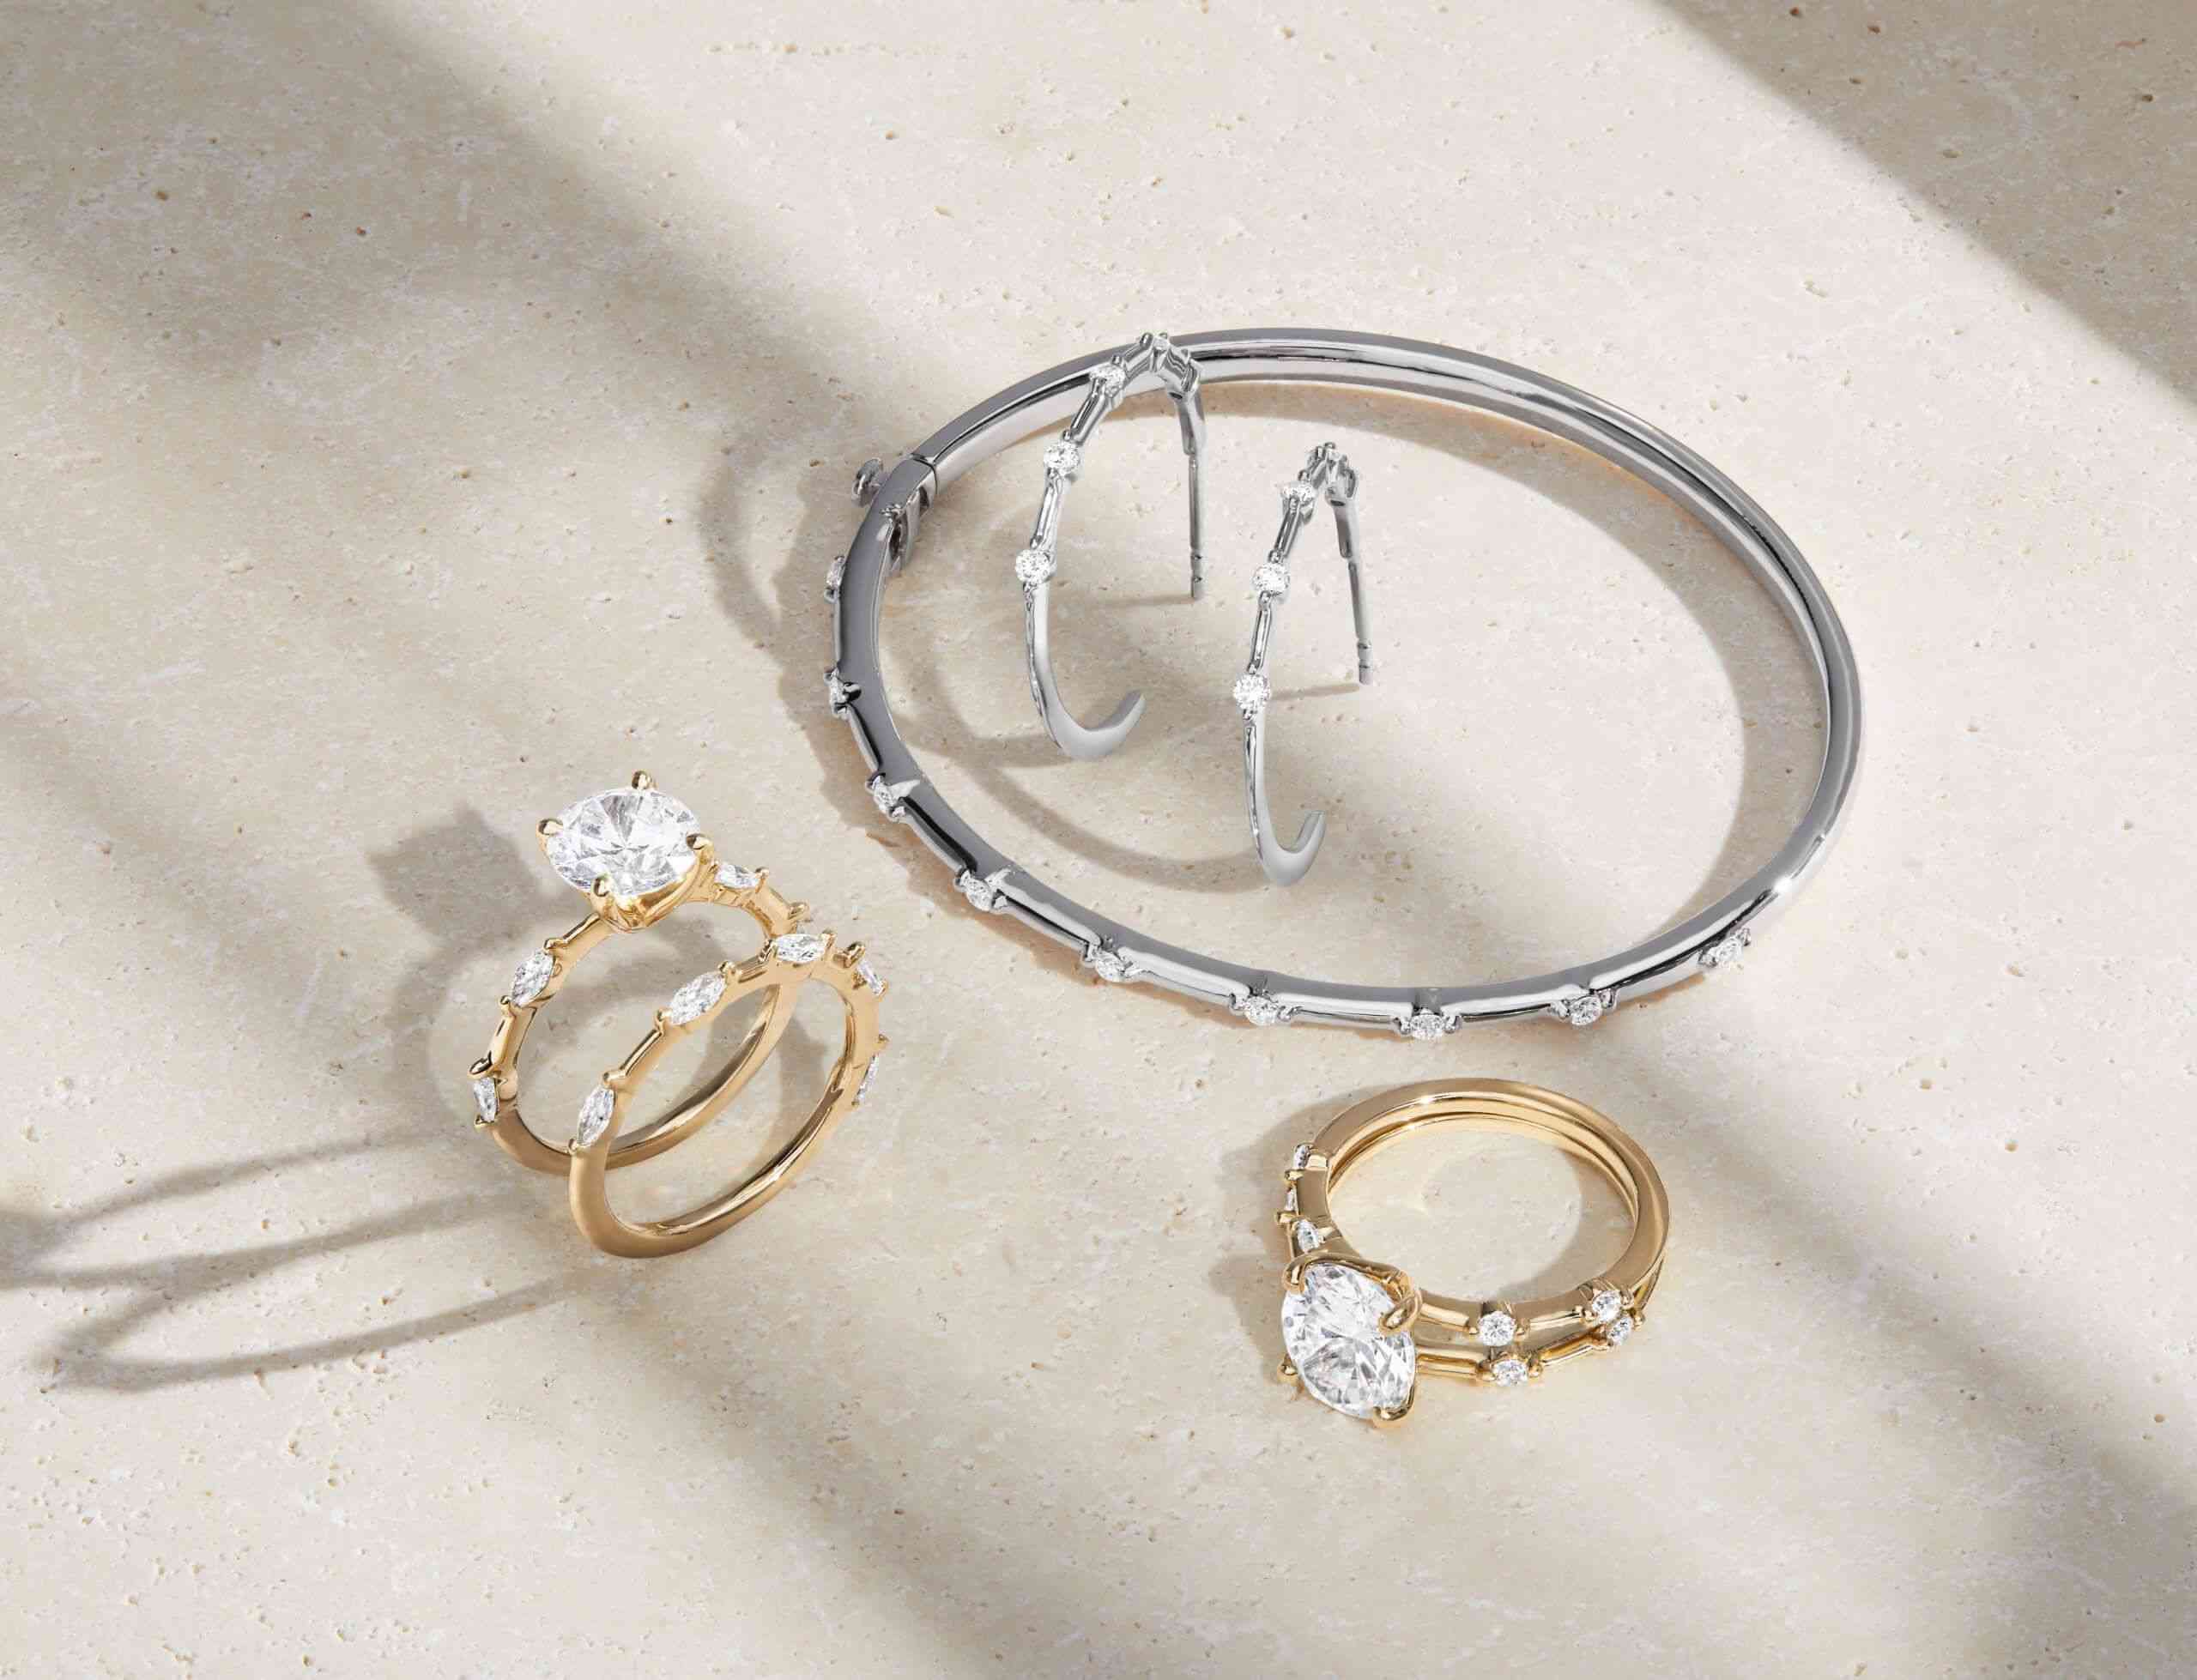 Assortment of diamond engagement rings, wedding rings, and fine jewelry from the Aimee Collection.